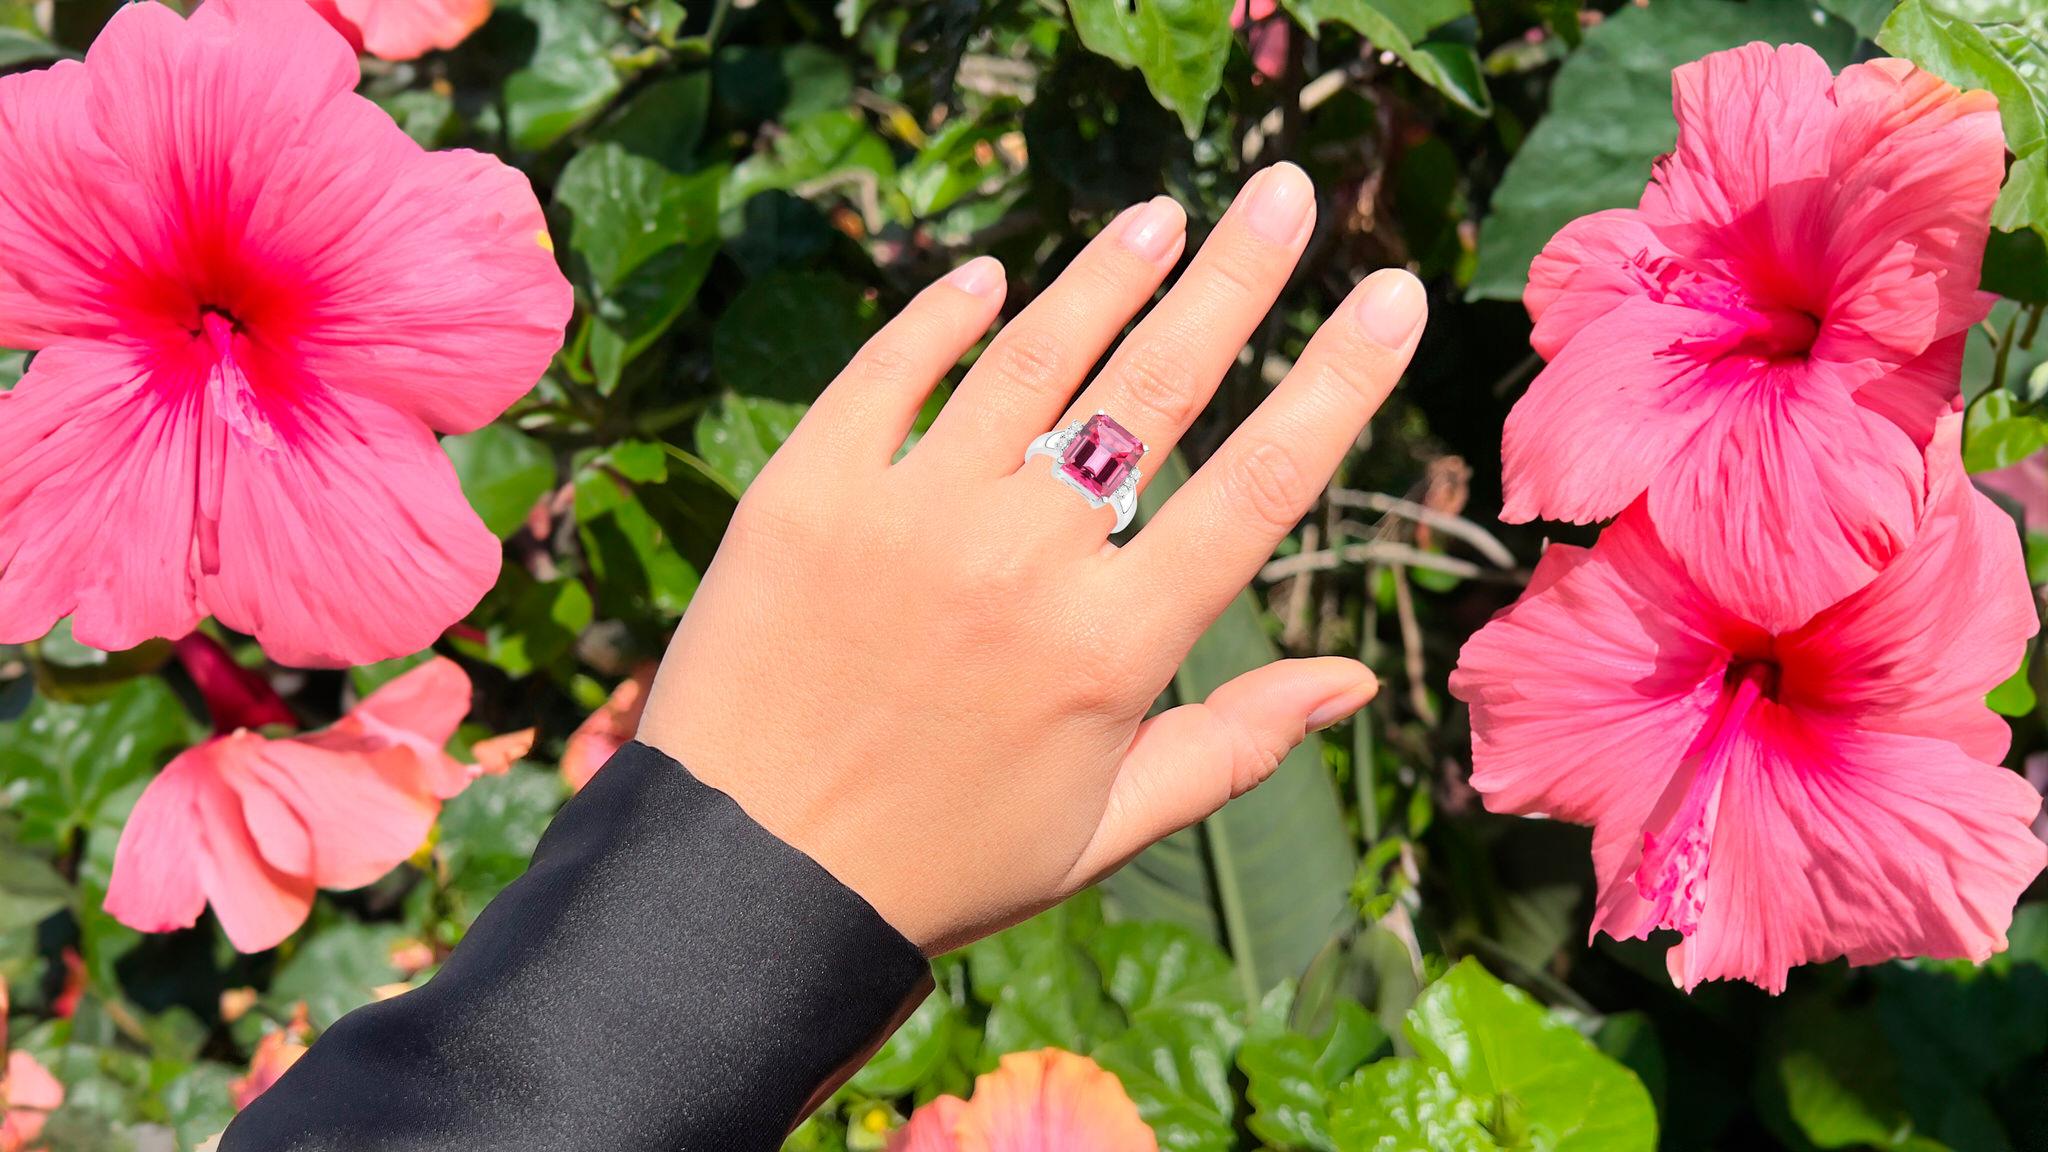 It comes with the Gemological Appraisal by GIA GG/AJP
All Gemstones are Natural
Pink Topaz = 7.20 Carats
6 White Topazes = 0.18 Carats
Metal: Rhodium Plated Sterling Silver
Ring Size: 7* US
*It can be resized complimentary